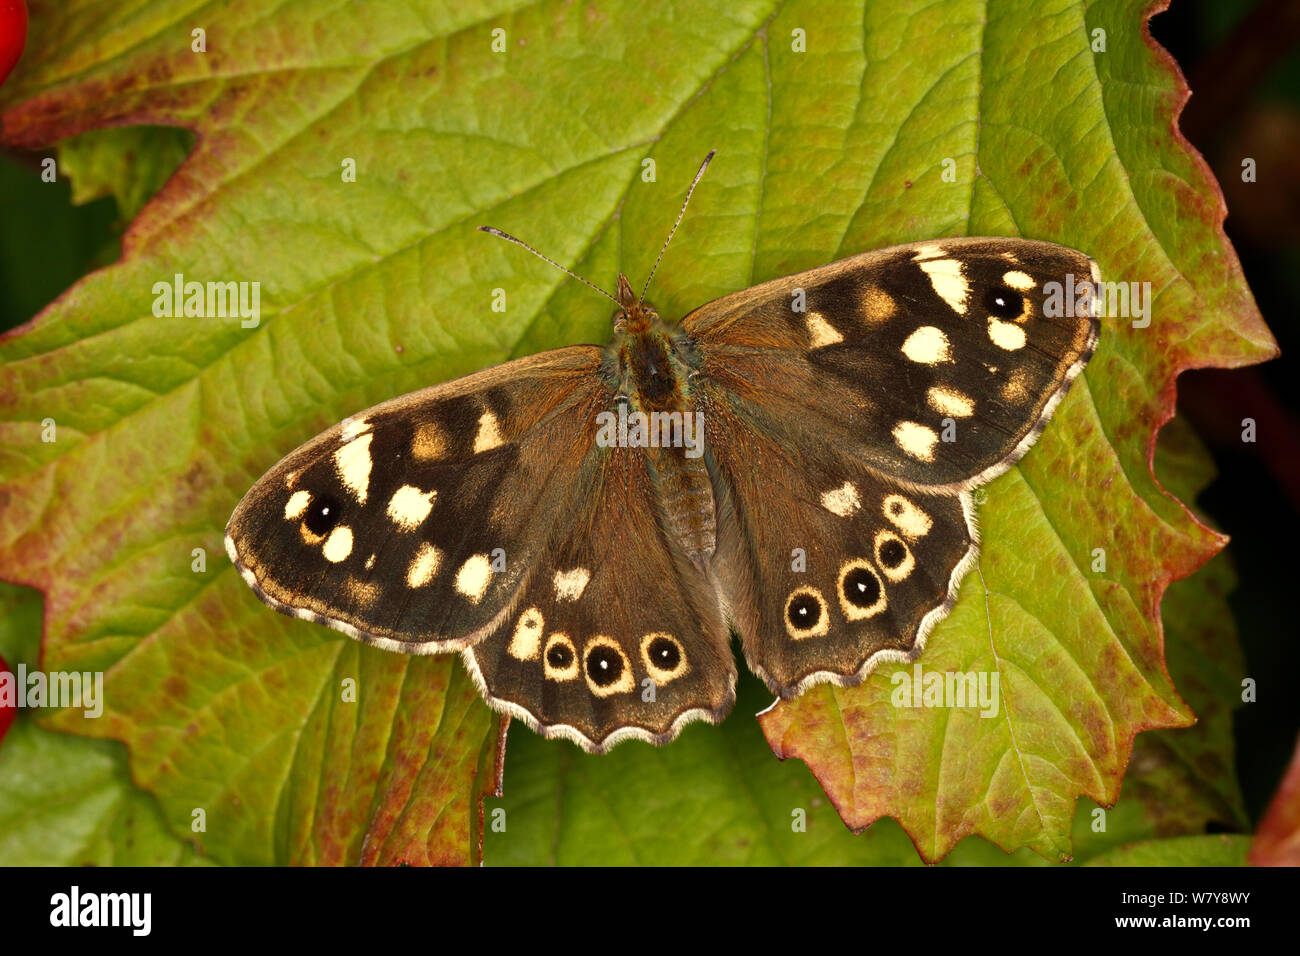 Speckled wood butterfly (Pararge aegeria) resting on leaf. Cheshire, UK, August. Stock Photo